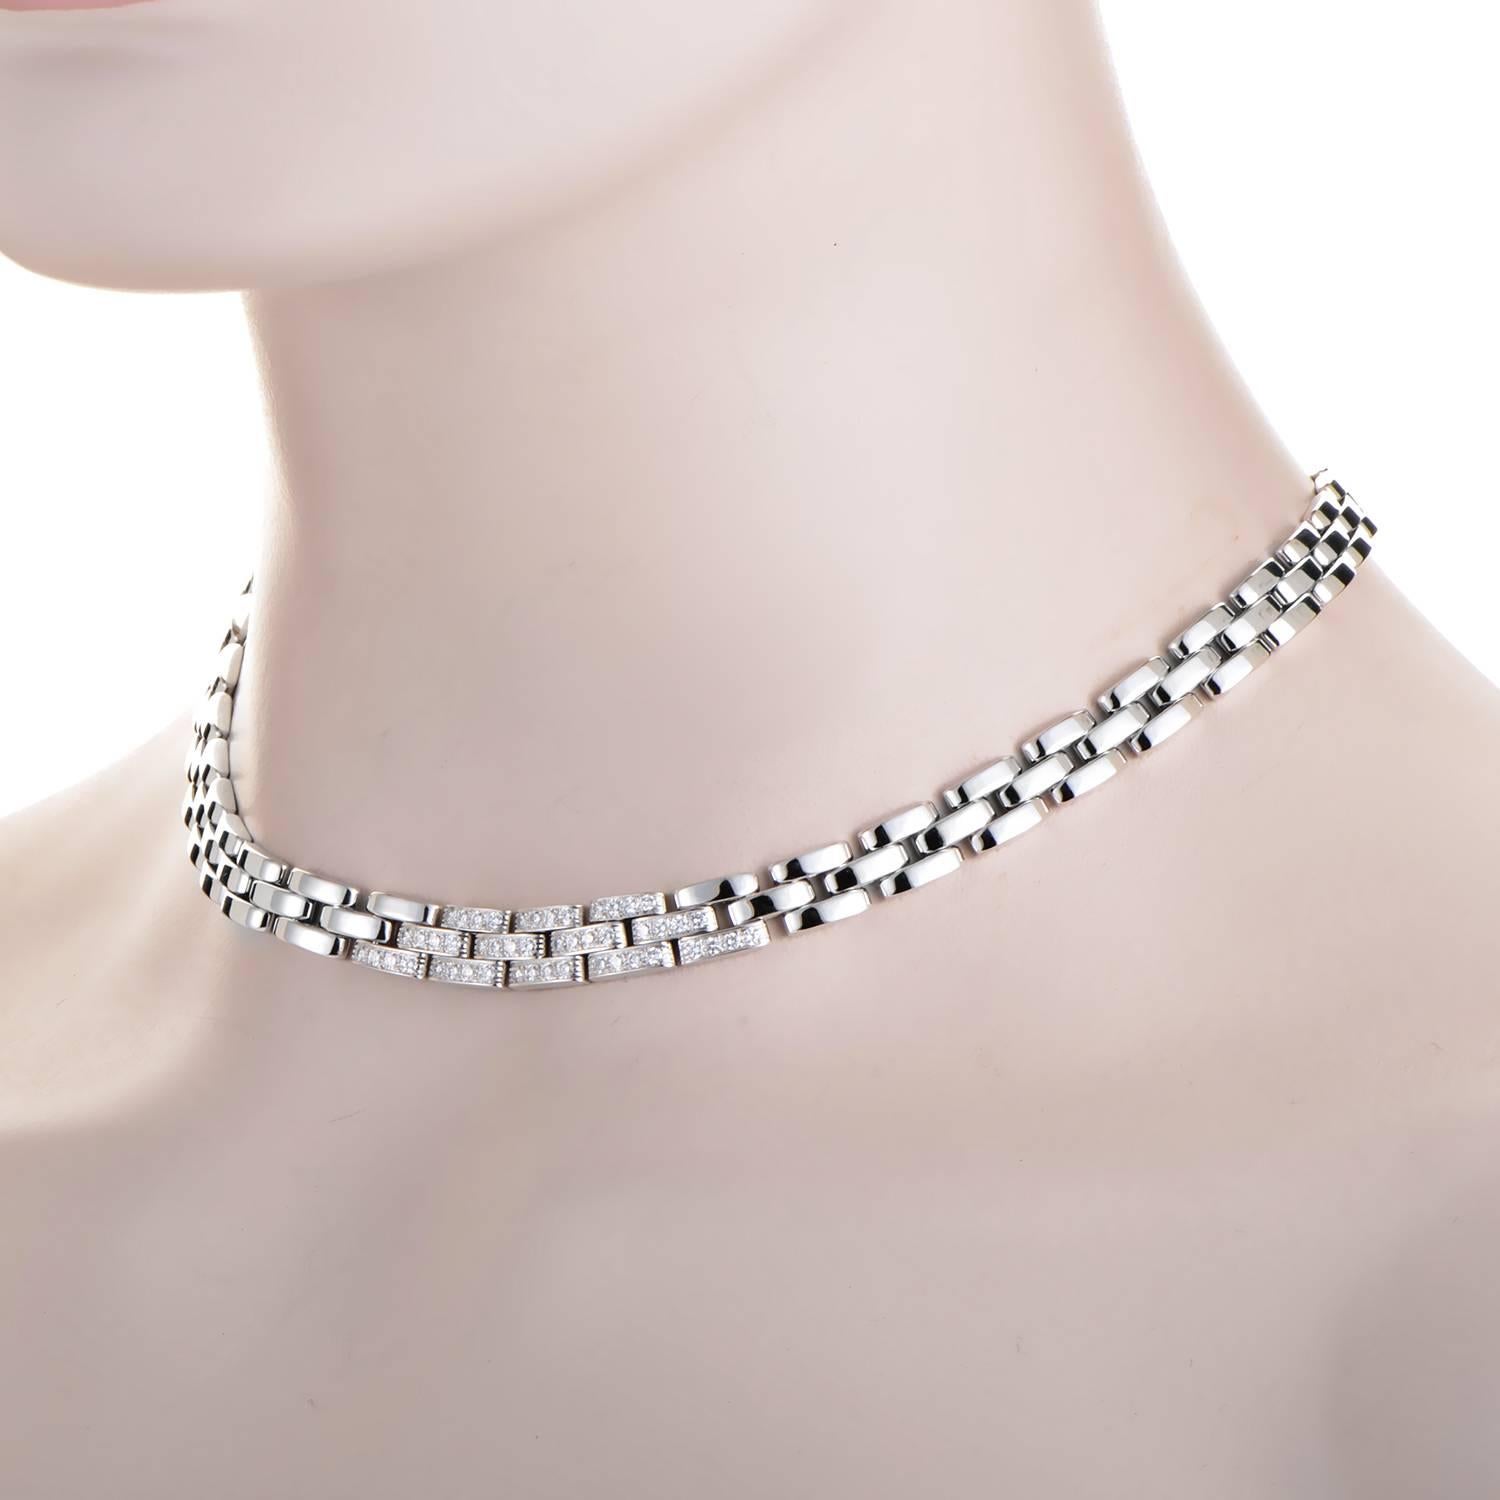 Cartier brings its uncompromising standard in luxury design to this dazzling necklace. The chain makes a clean, concise turn high against the neckline in a rippling 3-tiered stream of 18K White Gold links. Its tide culminates at the front and